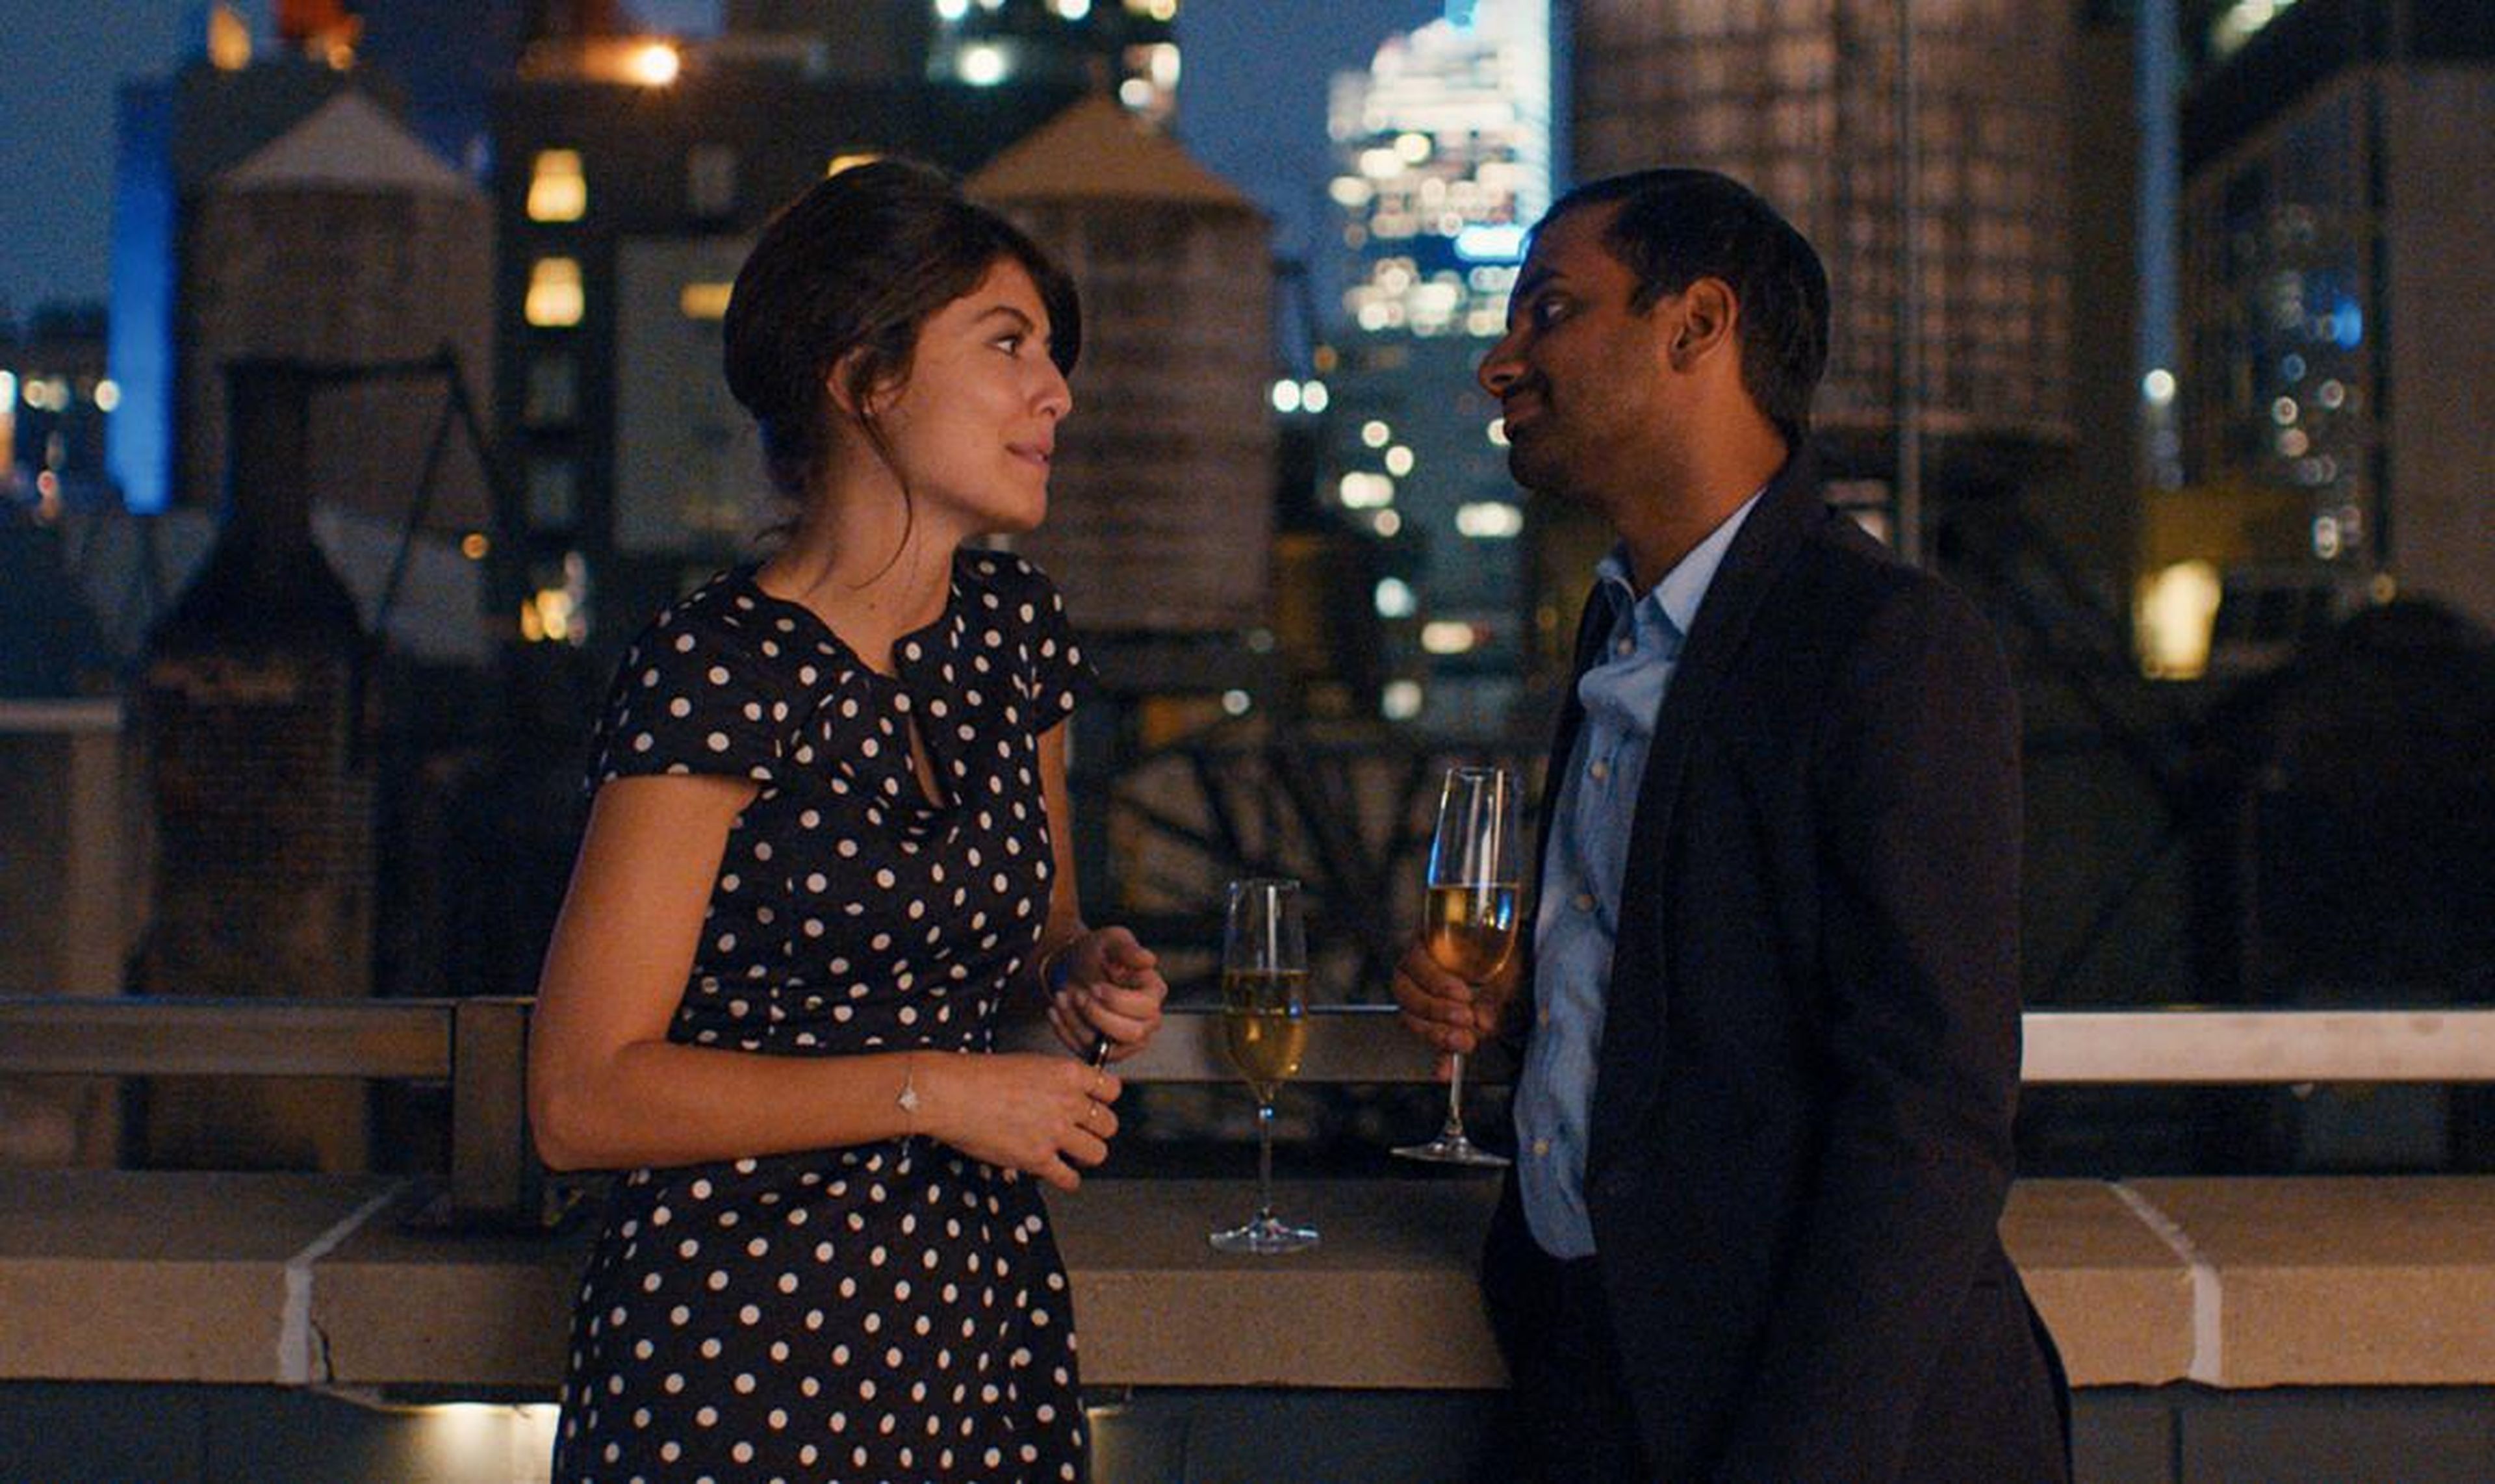 The Netflix show "Master of None" deals with the personal life of Dev, an actor in New York played by Ansari.